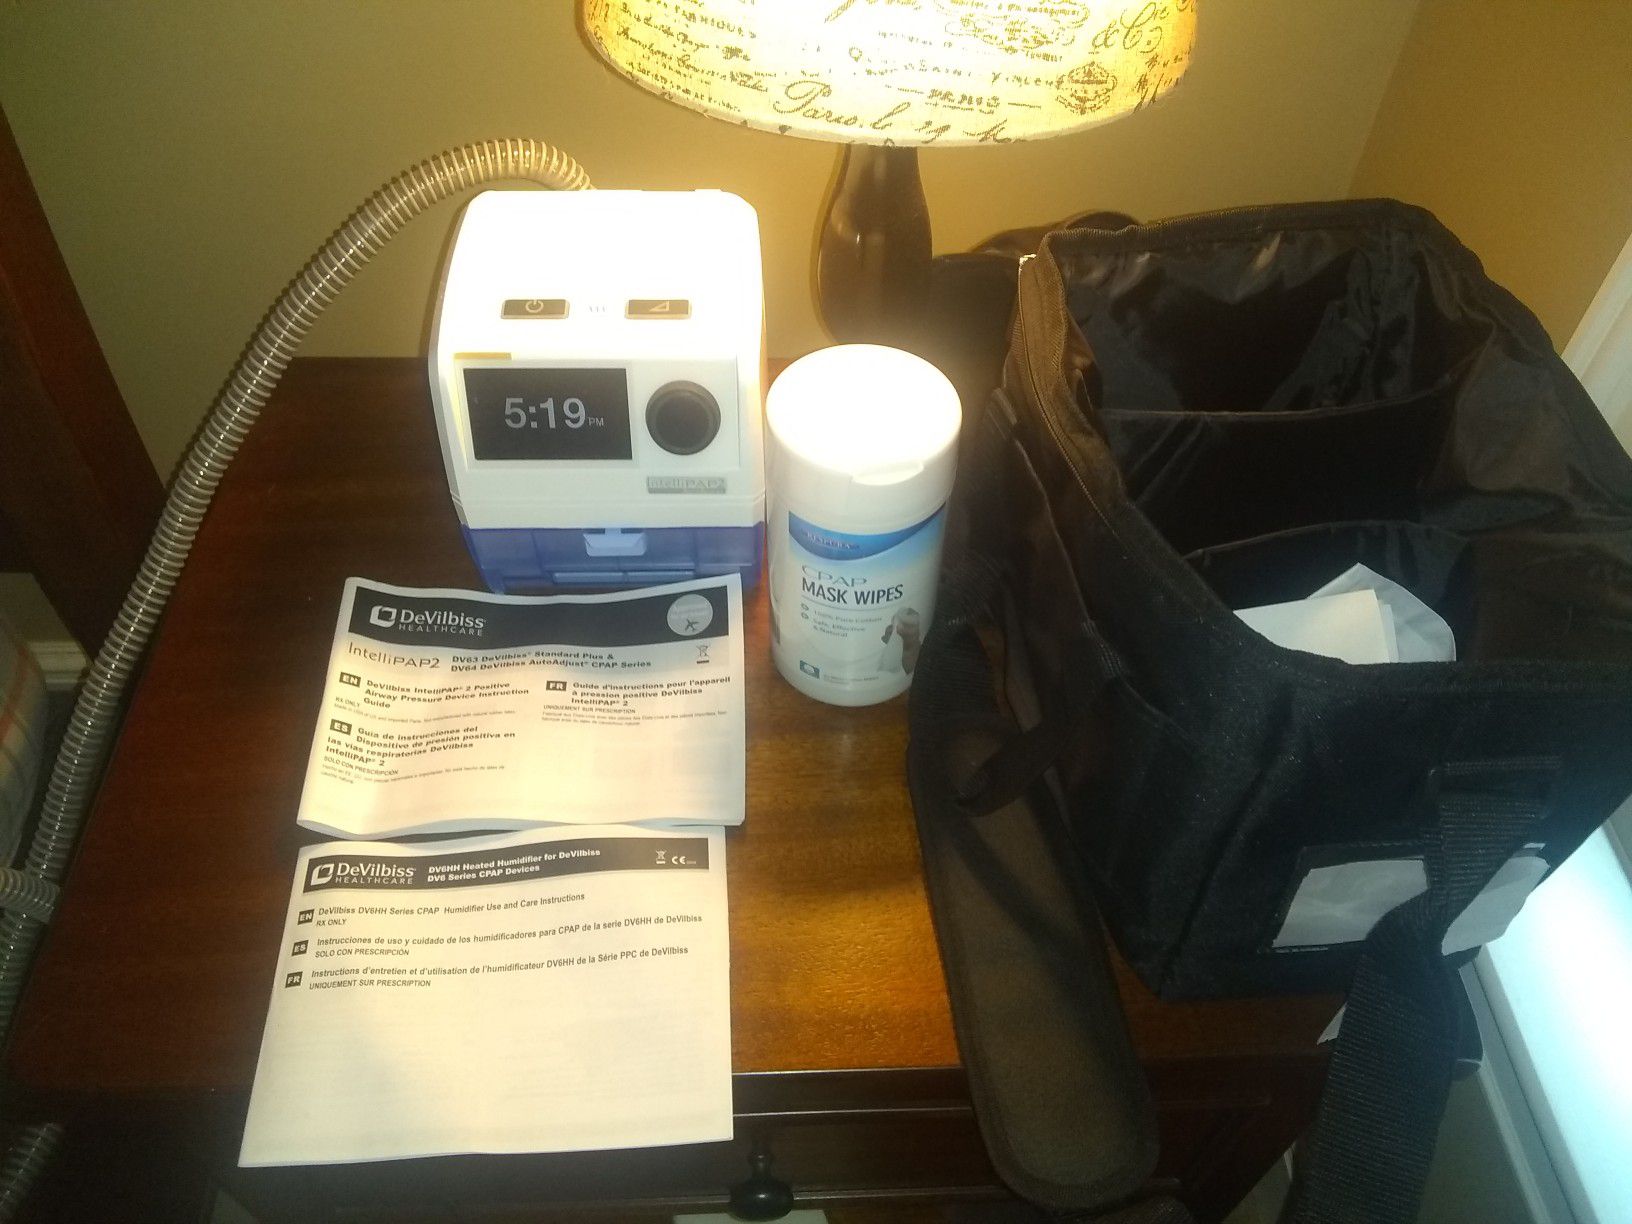 Devilbiss CPAP machine with humidifier